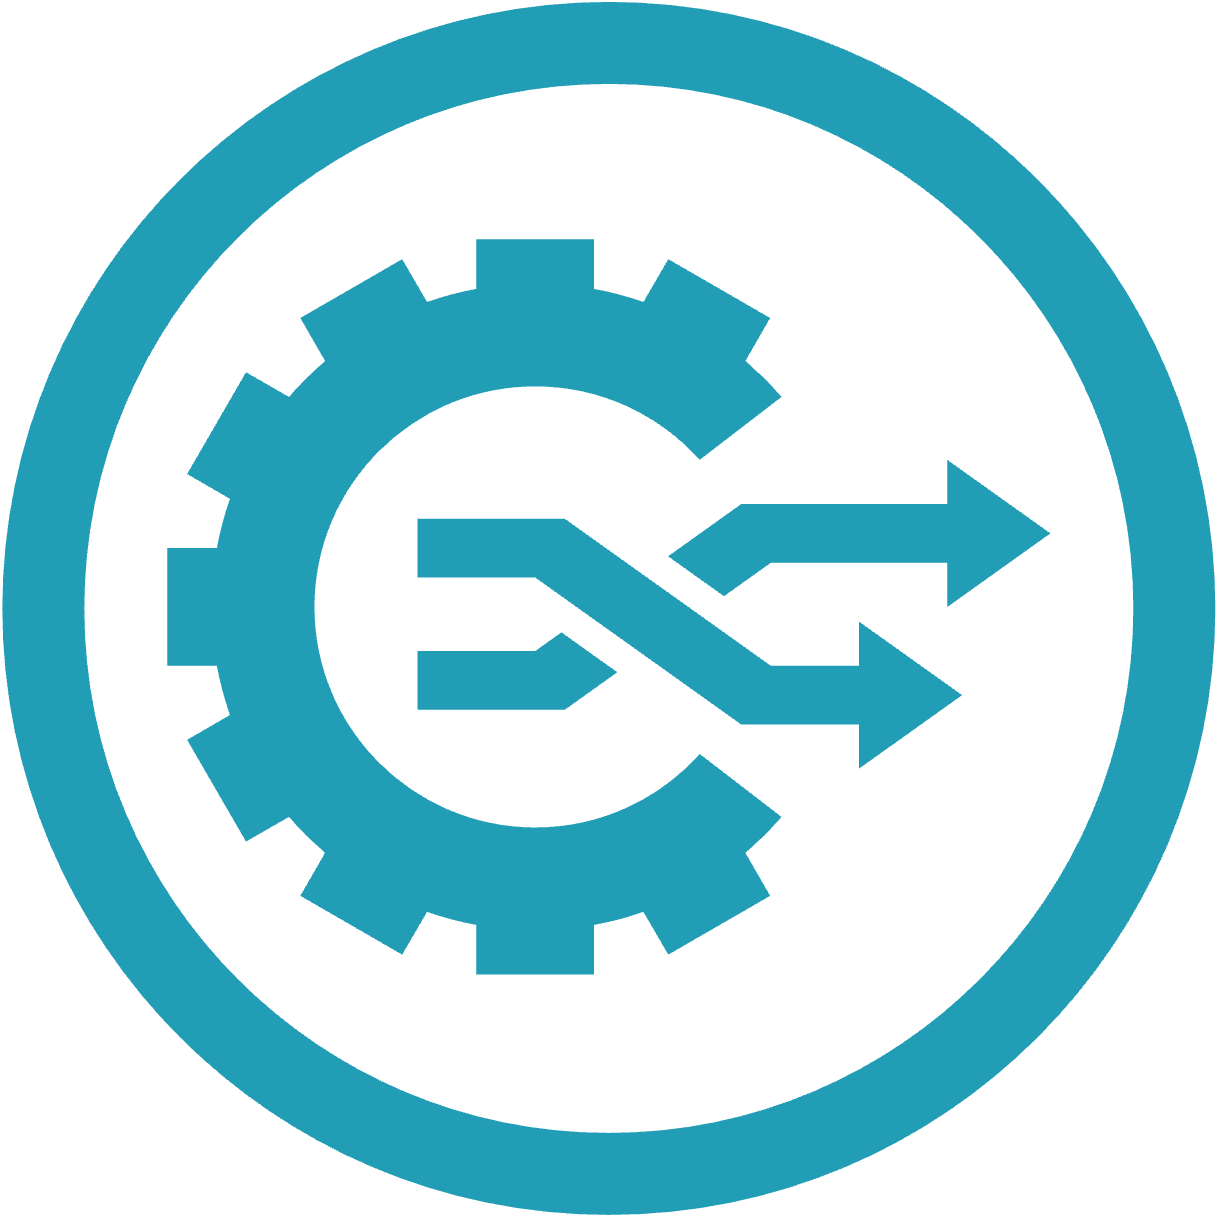 Circular icon of a gear with crossing arrows emerging to the right